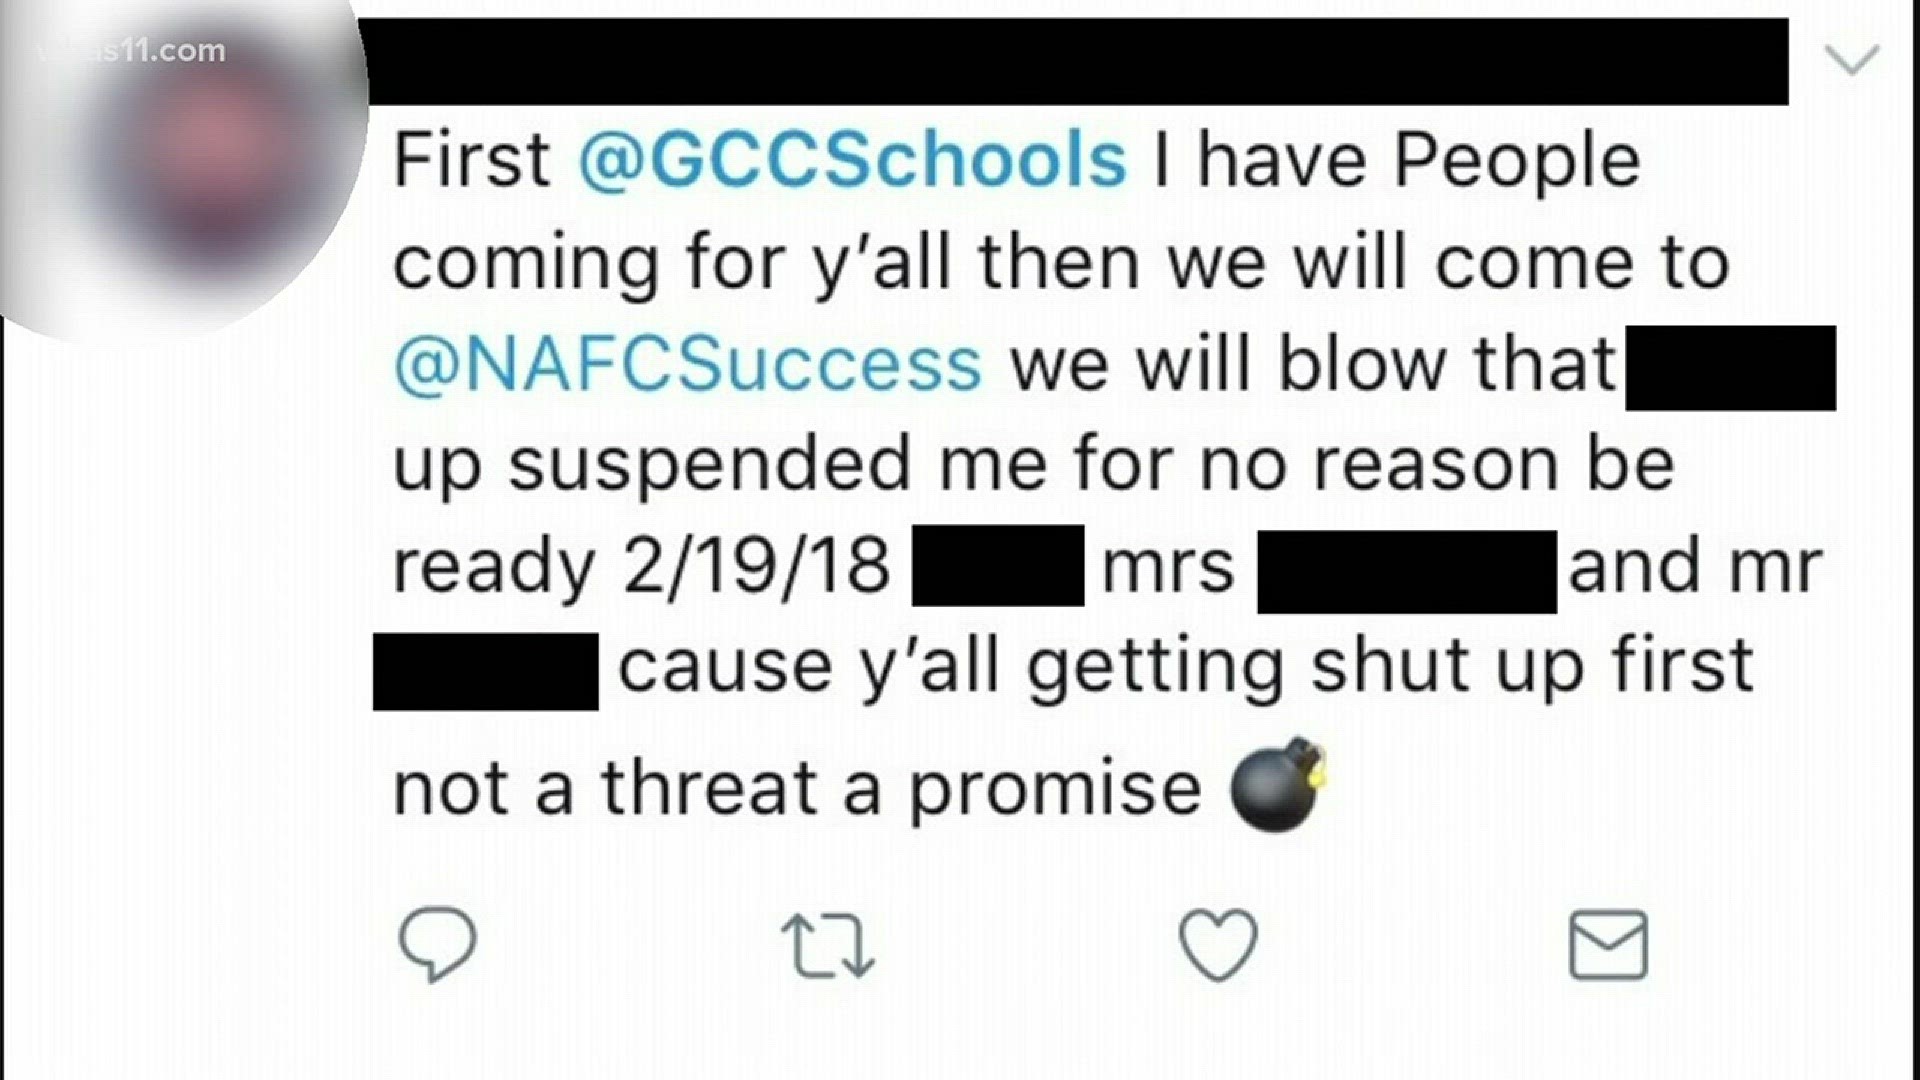 15-year-old arrested for social media threat against GCC